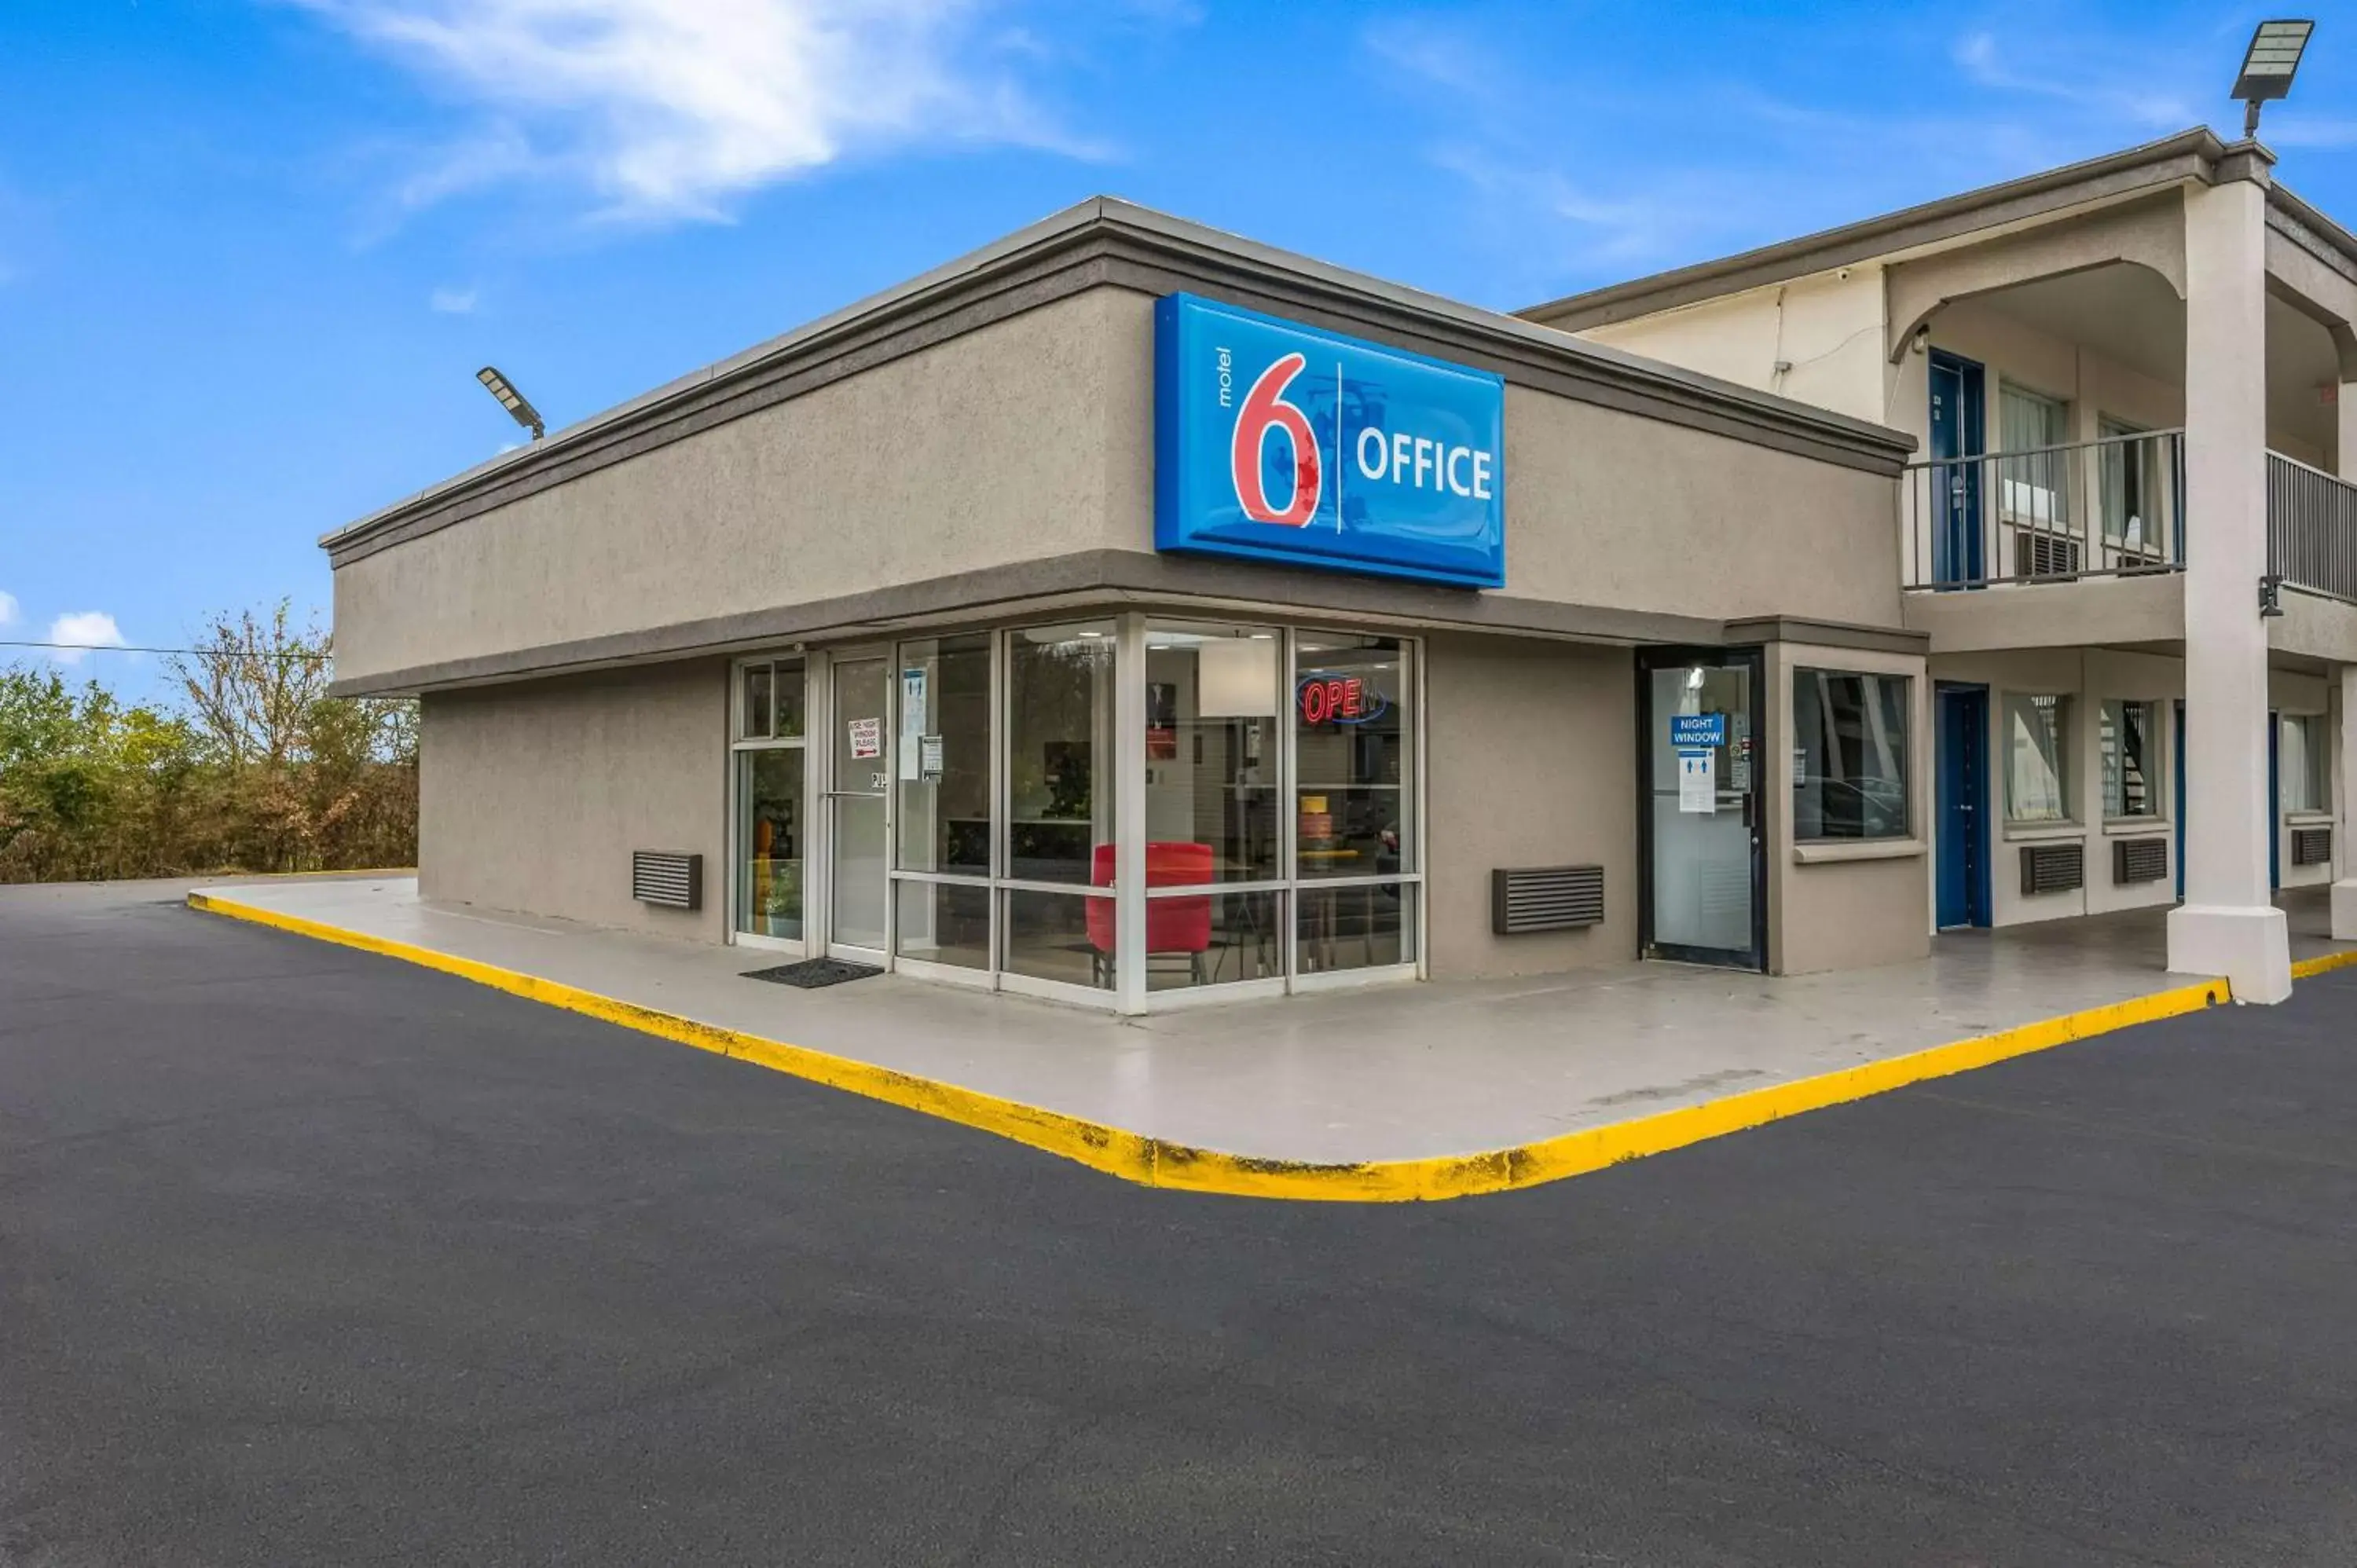 Property building in Motel 6-Tupelo, MS - Downtown